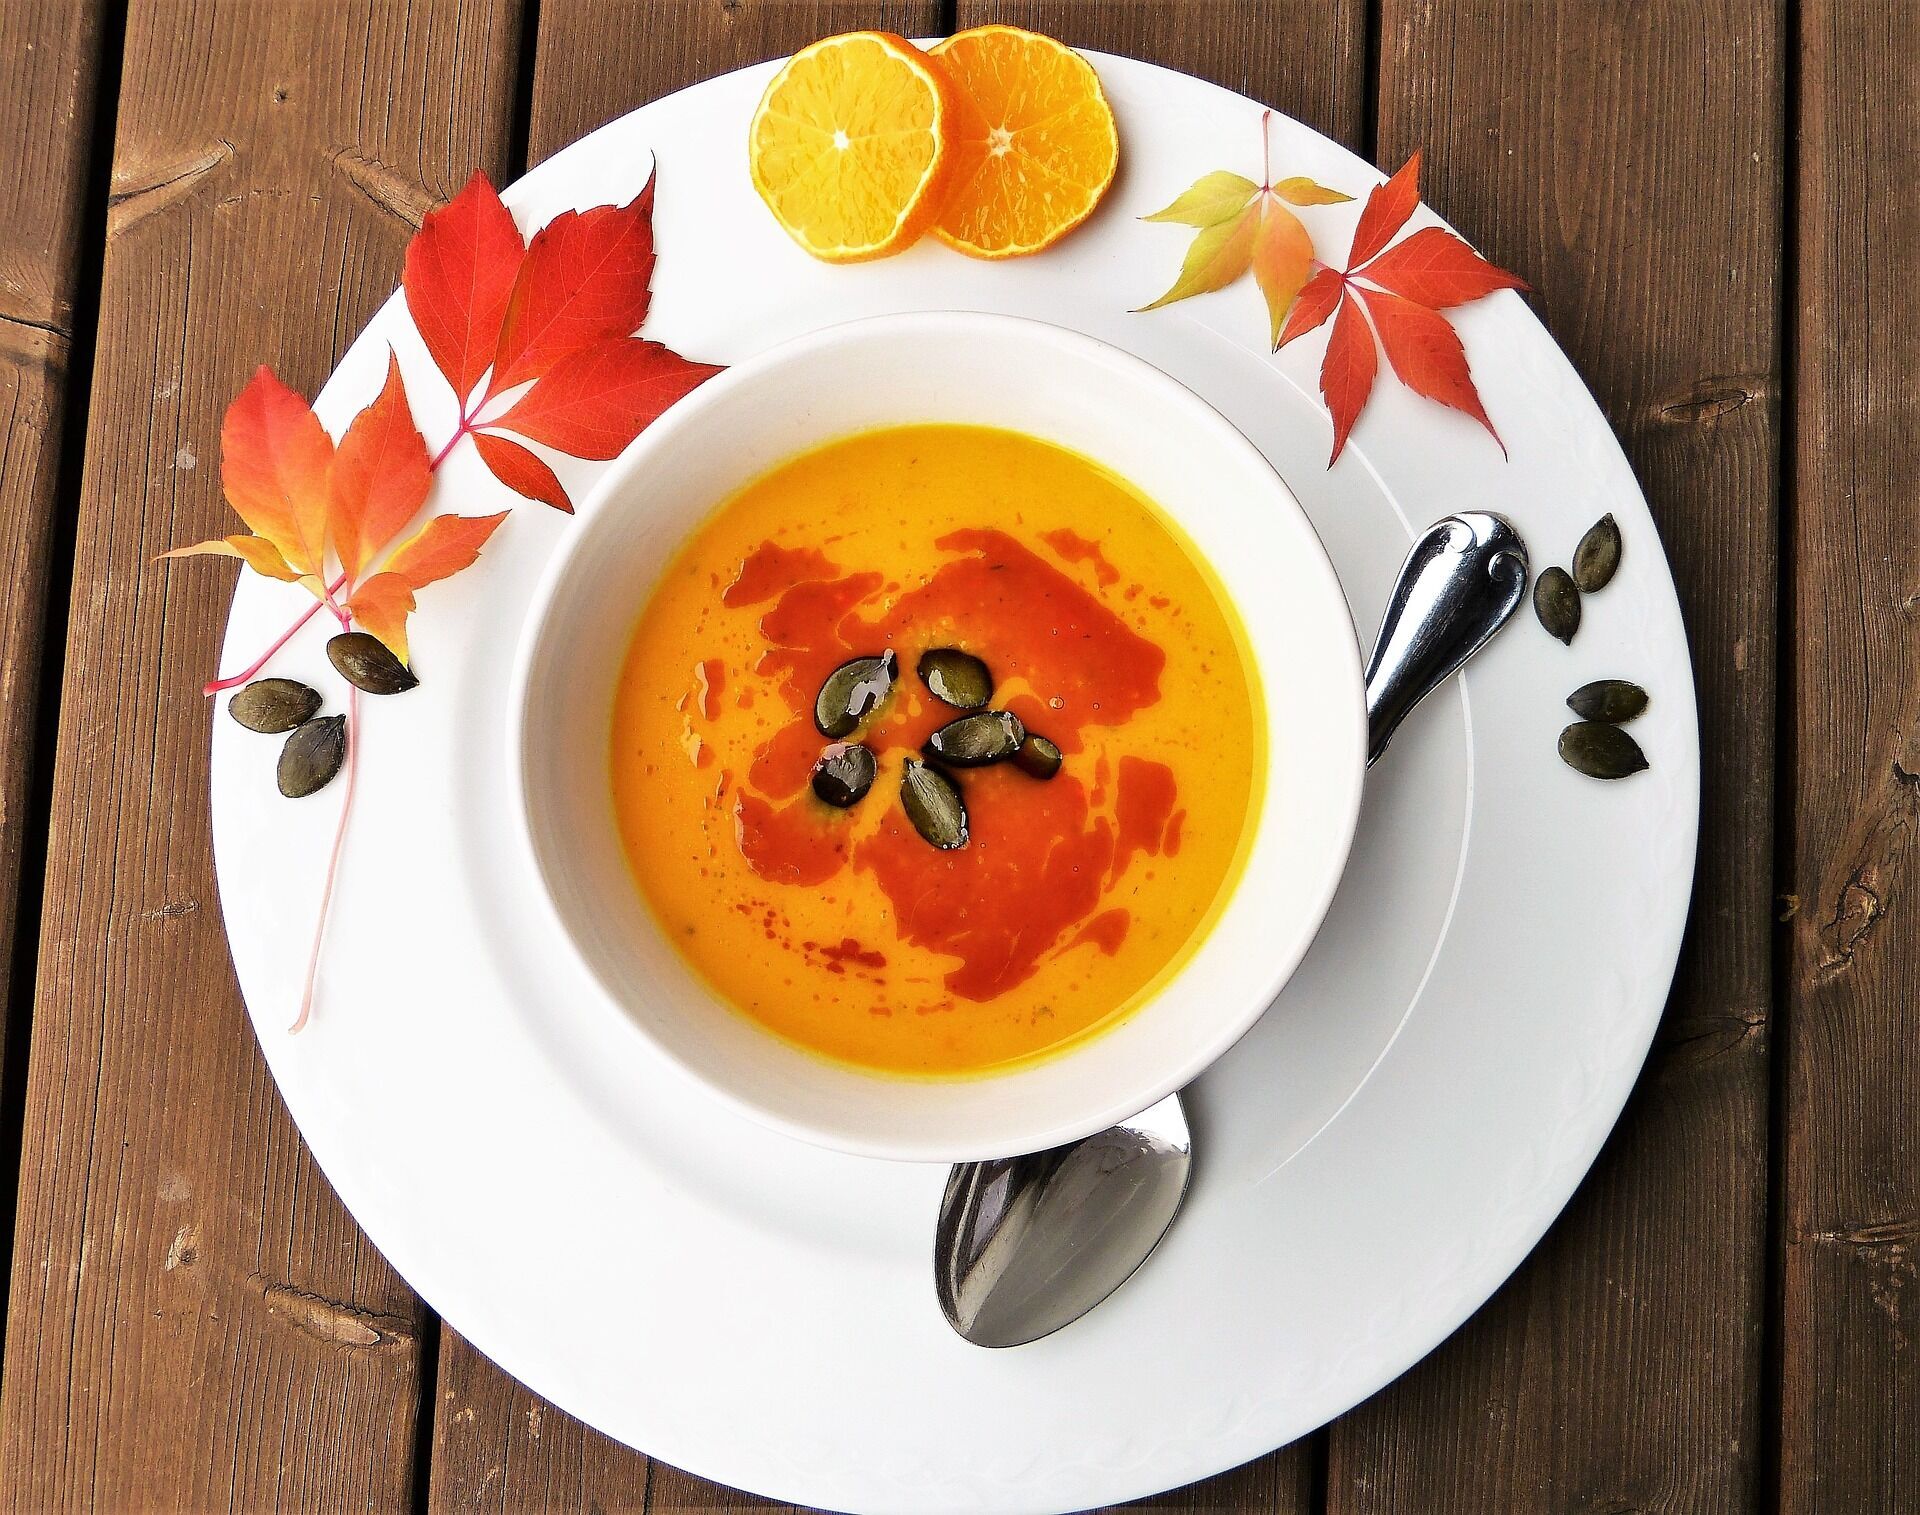 Pumpkin and ginger cream soup